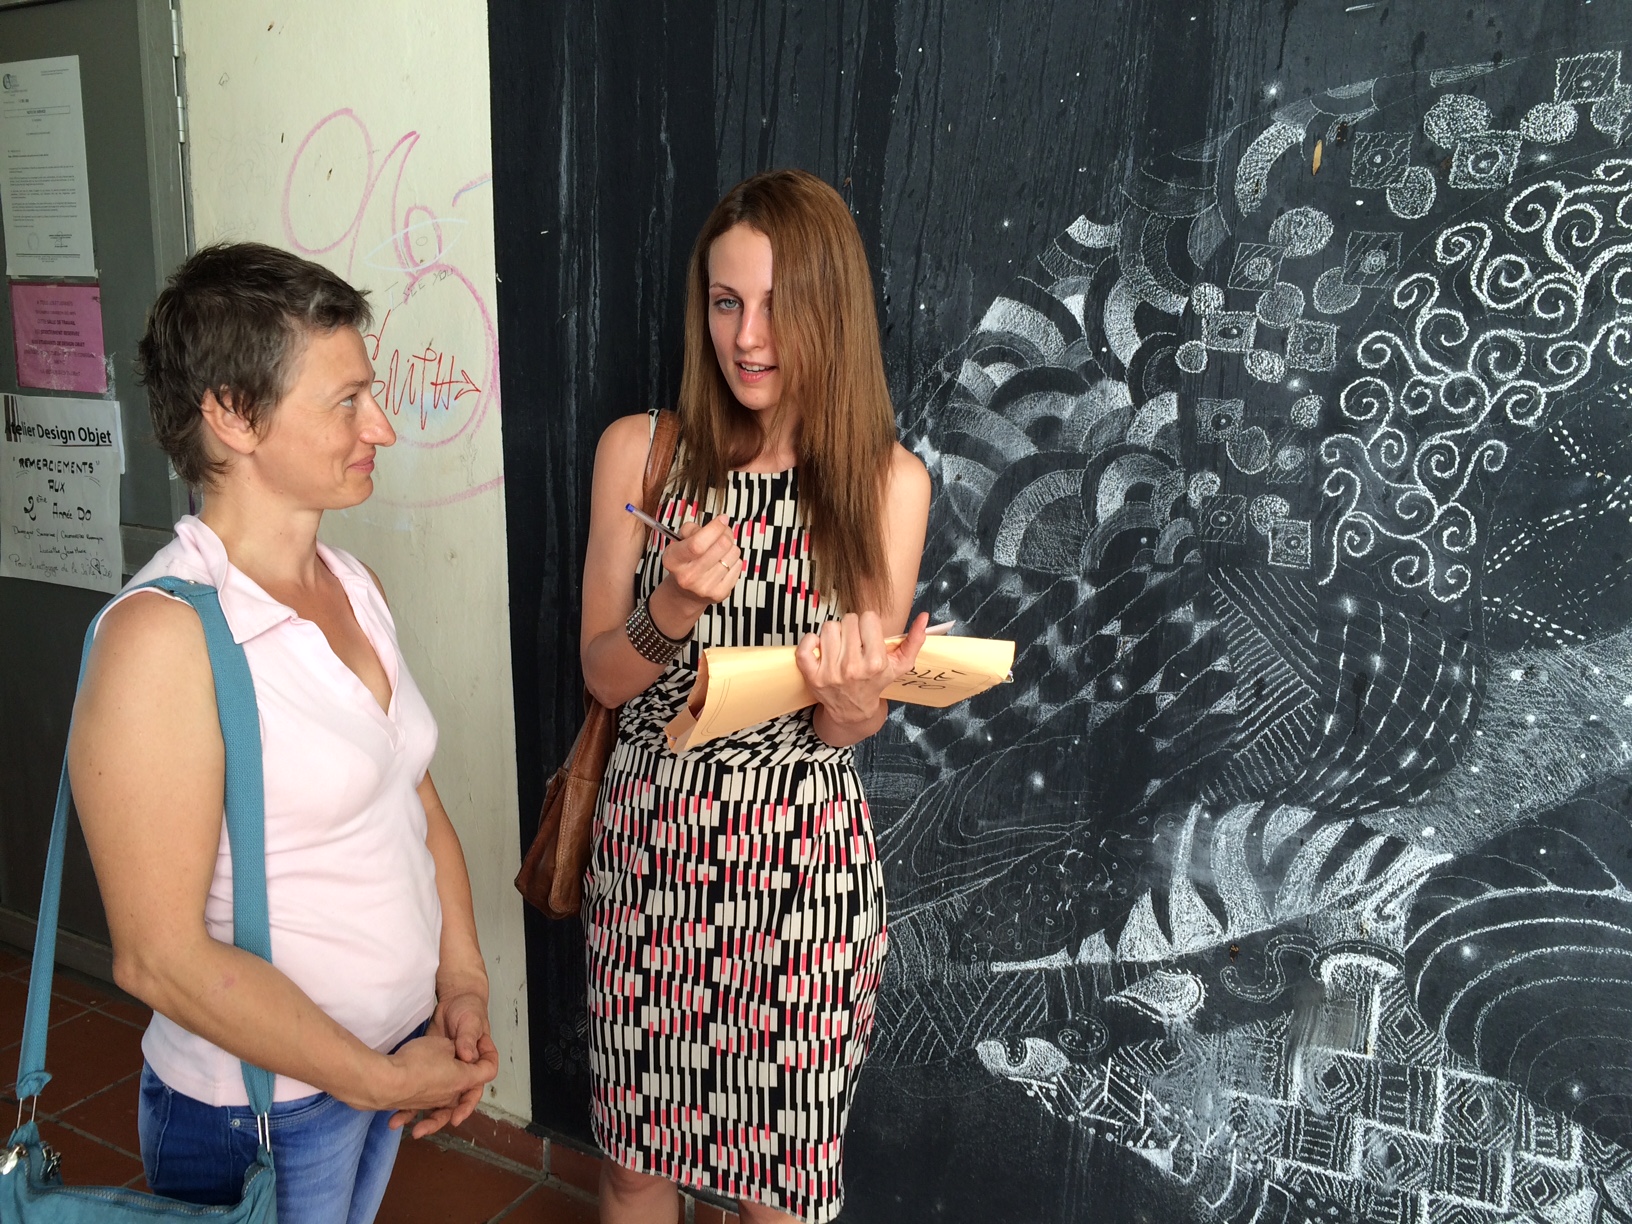 Lana Kustova (right) talking with a student at the art school of Martinique, Jan. 2016.